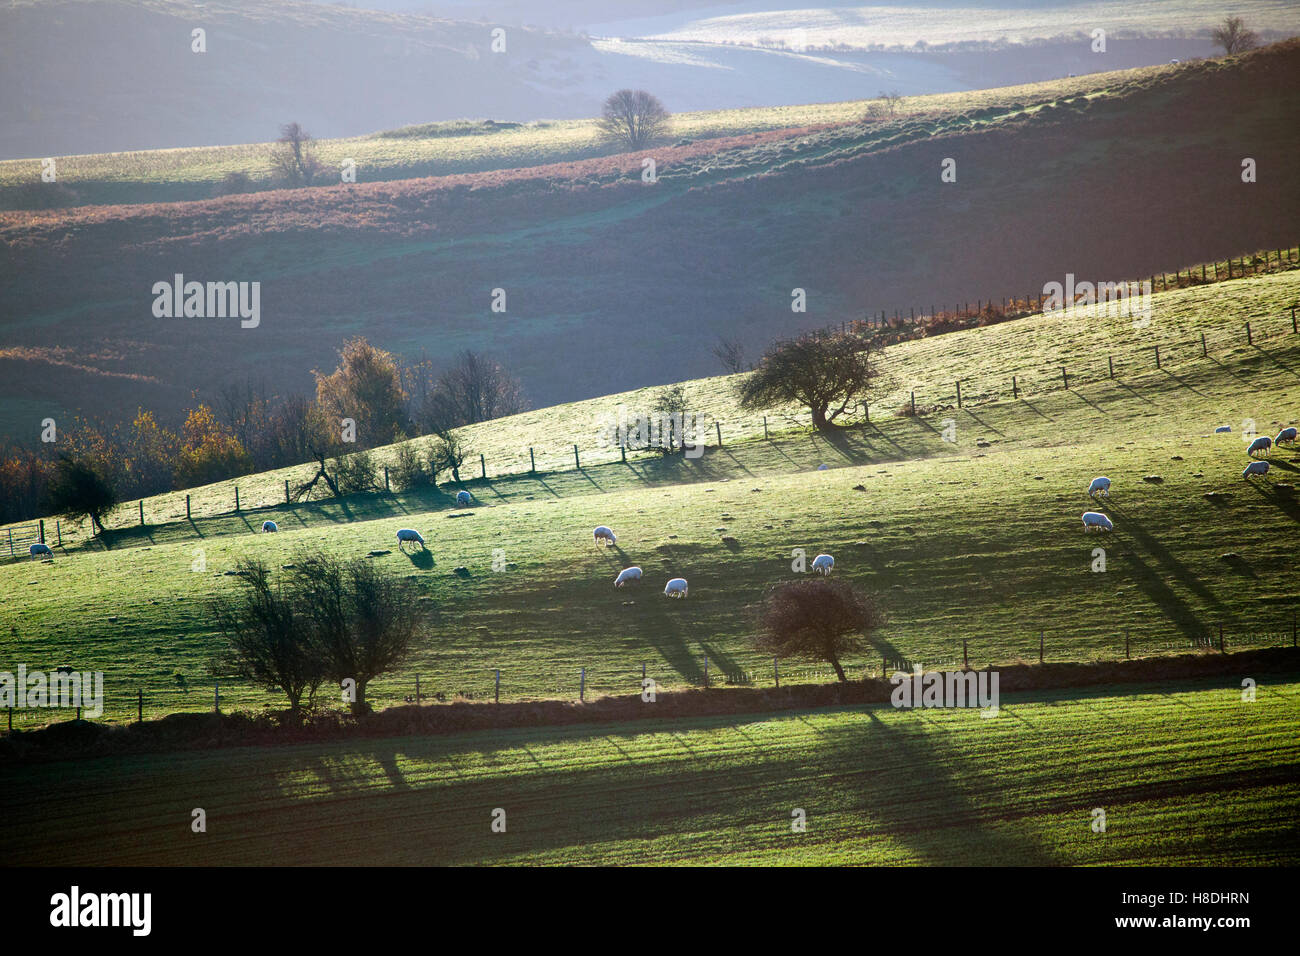 Morning sun begins the bathe the East side of the Clwydian HIlls located in North Wales with upland sheep grazing on the land on a upland sheep farm Stock Photo